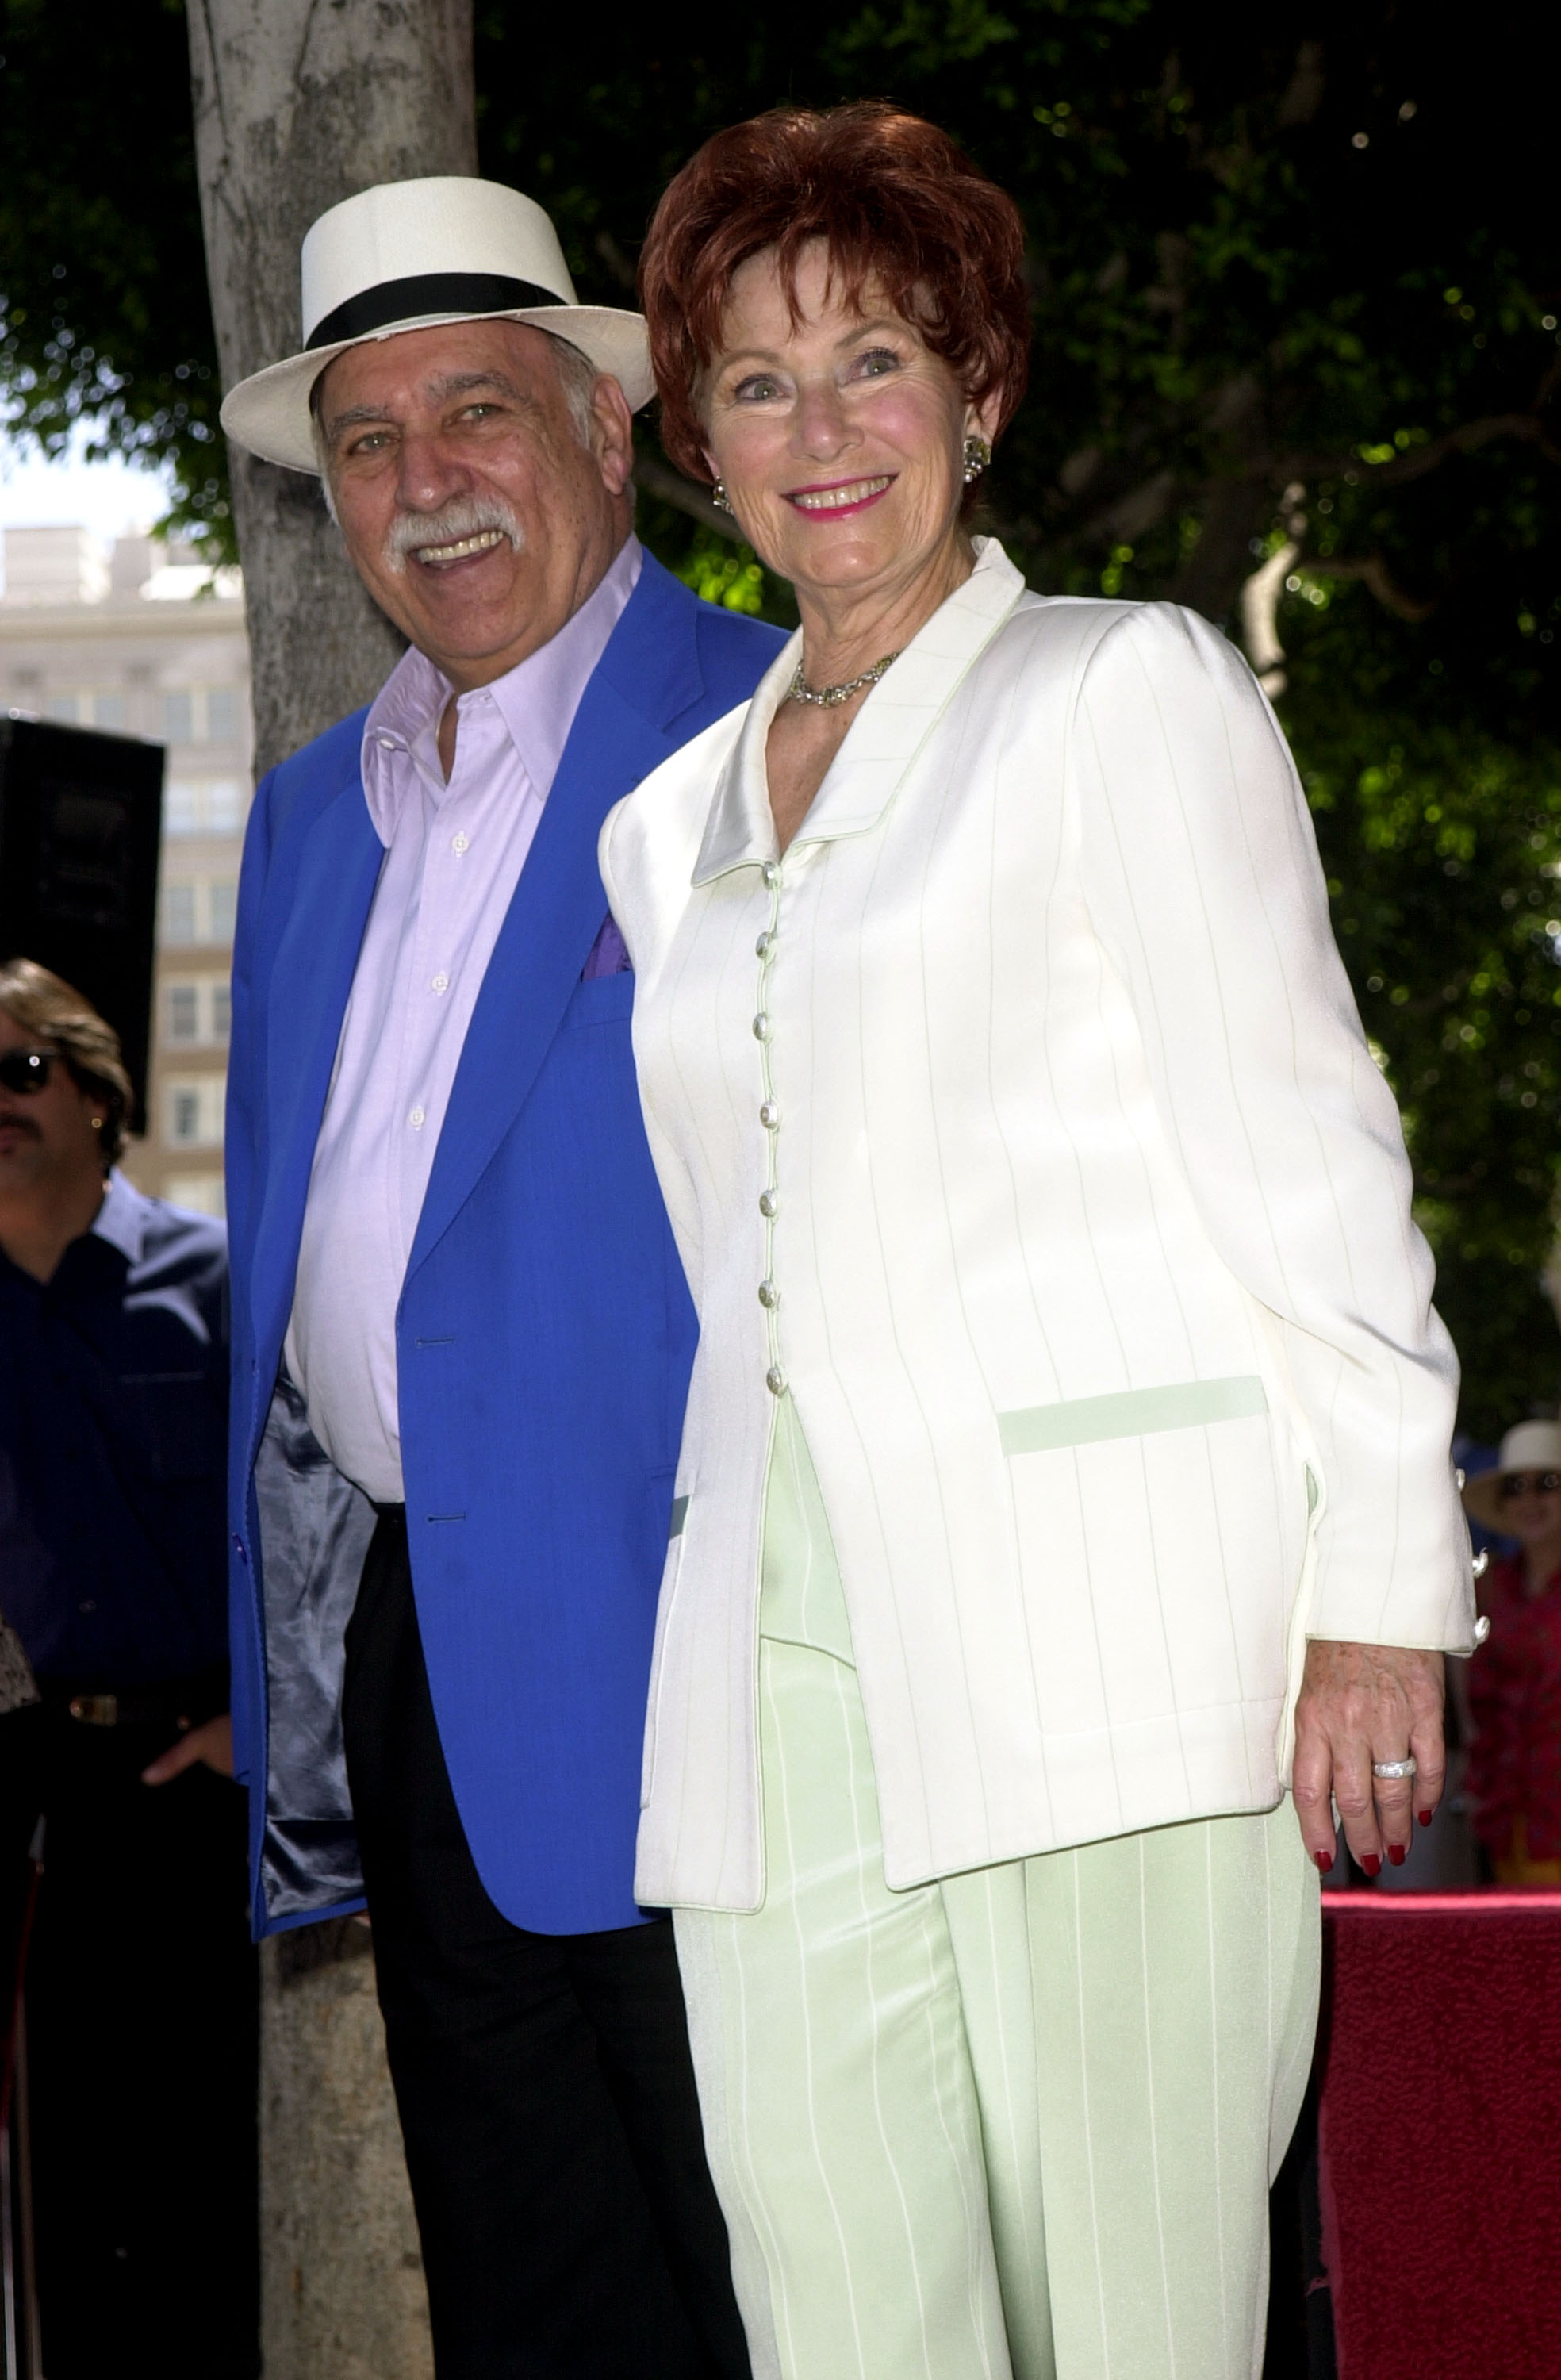 Paul Michael & Marion Ross during Marion Ross Honored with a Star on the Hollywood Walk of Fame at Hollywood Boulevard in Hollywood, California, United States | Source: Getty Images